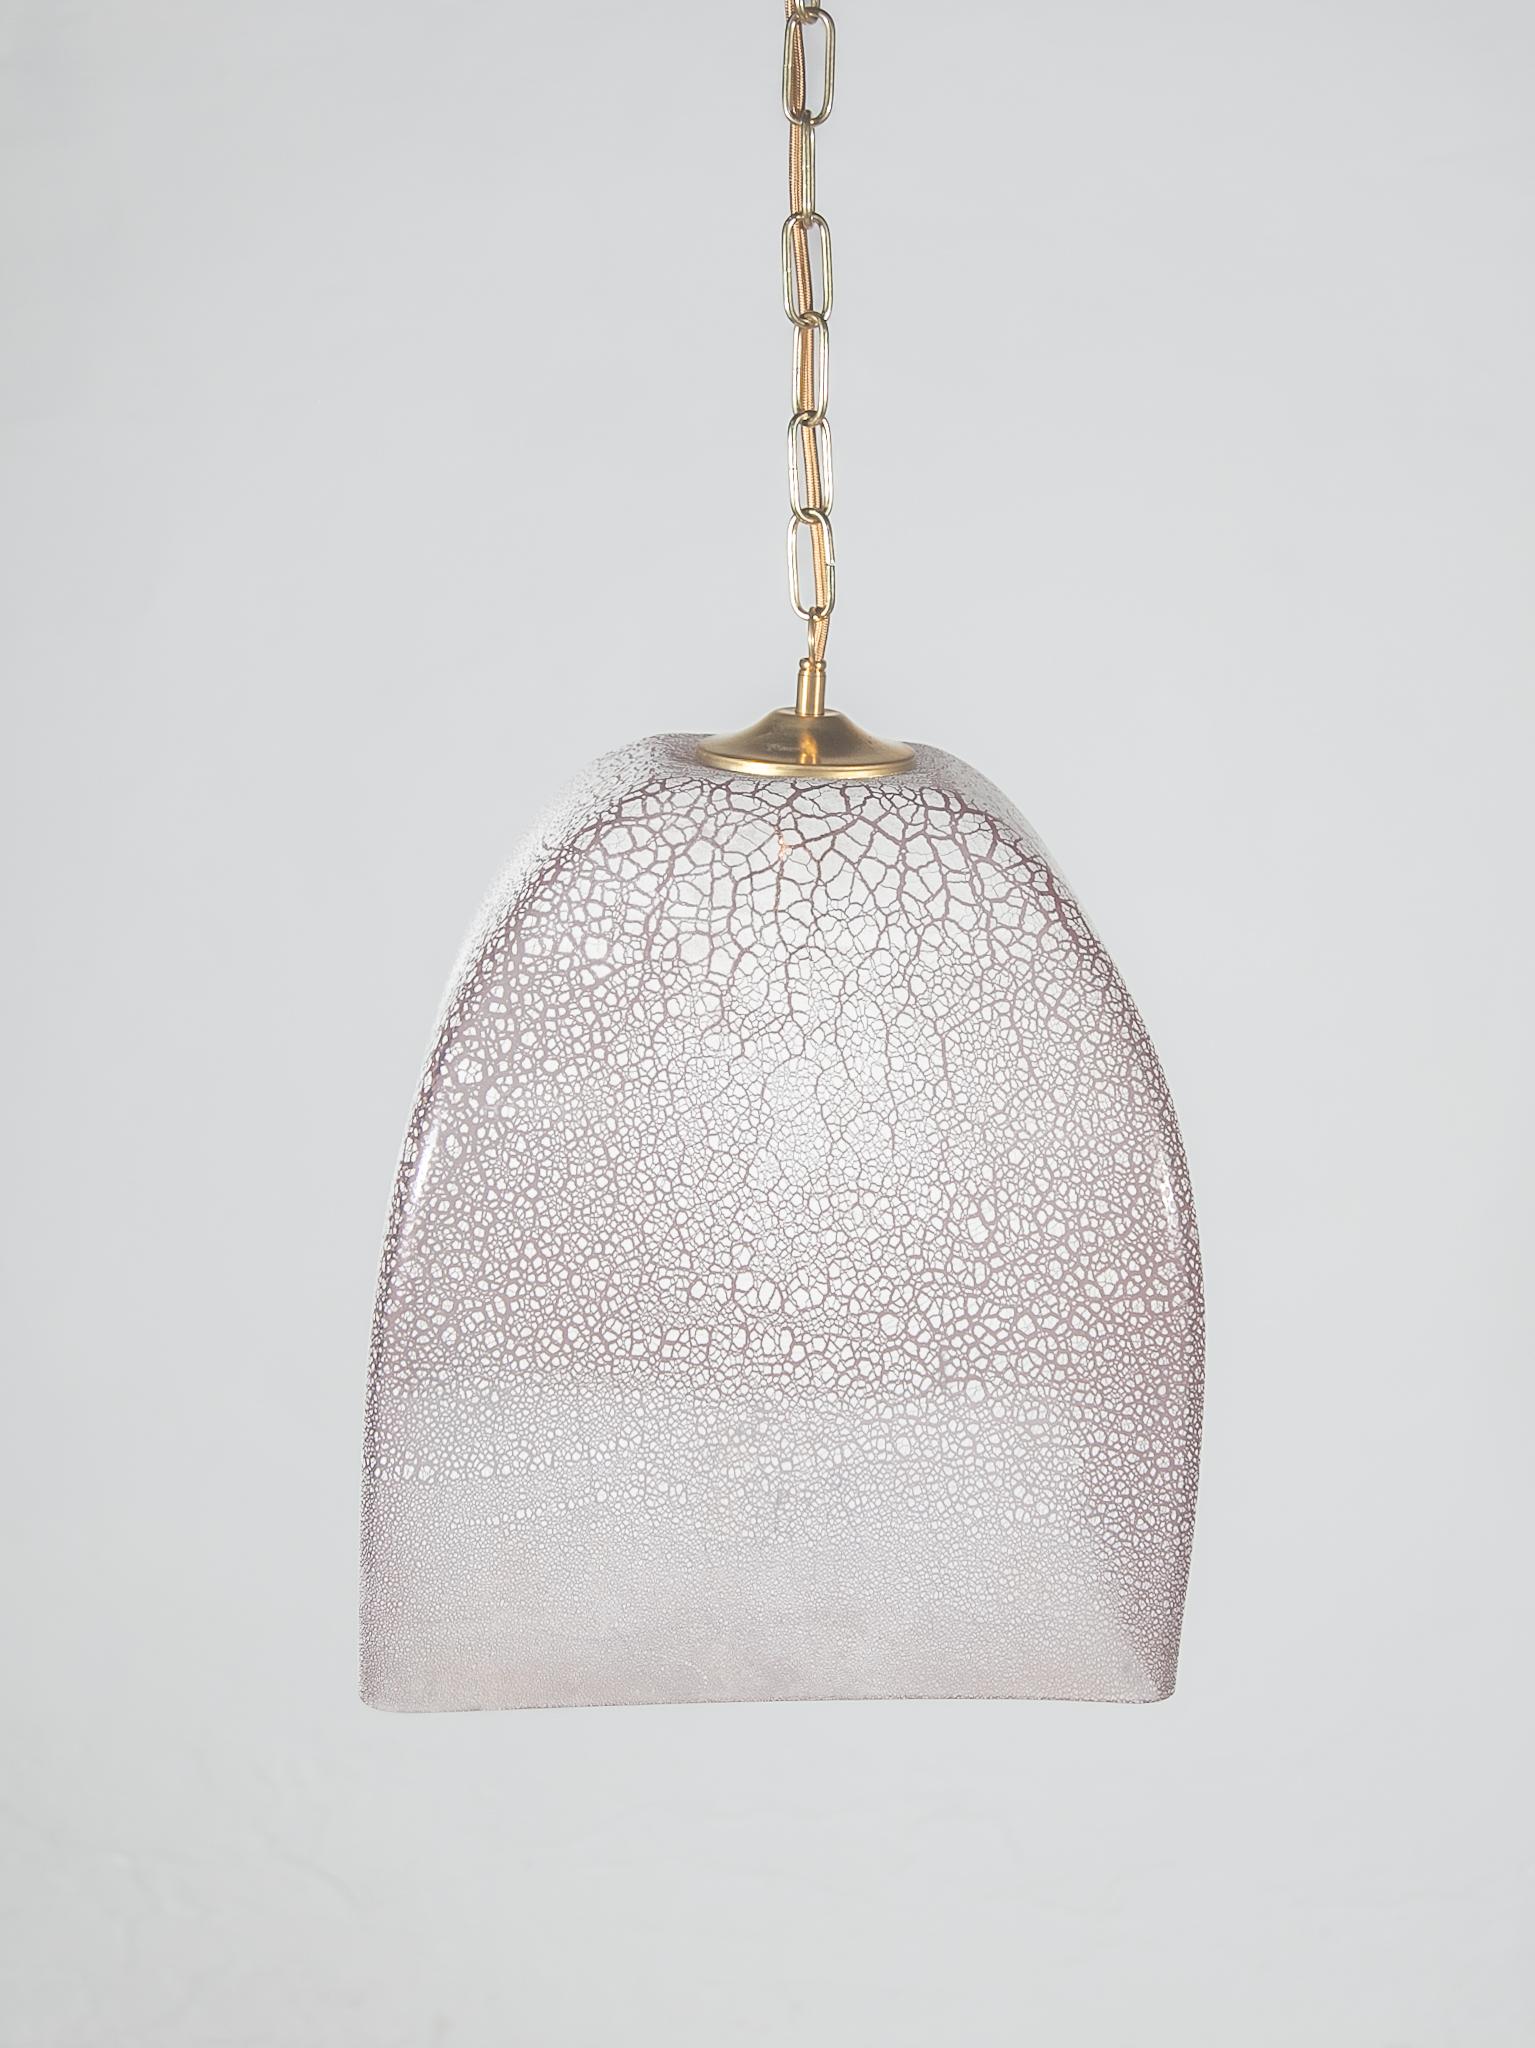 Pink Glass Textured Pendant designed by Alfredo Barbini, Italy 1